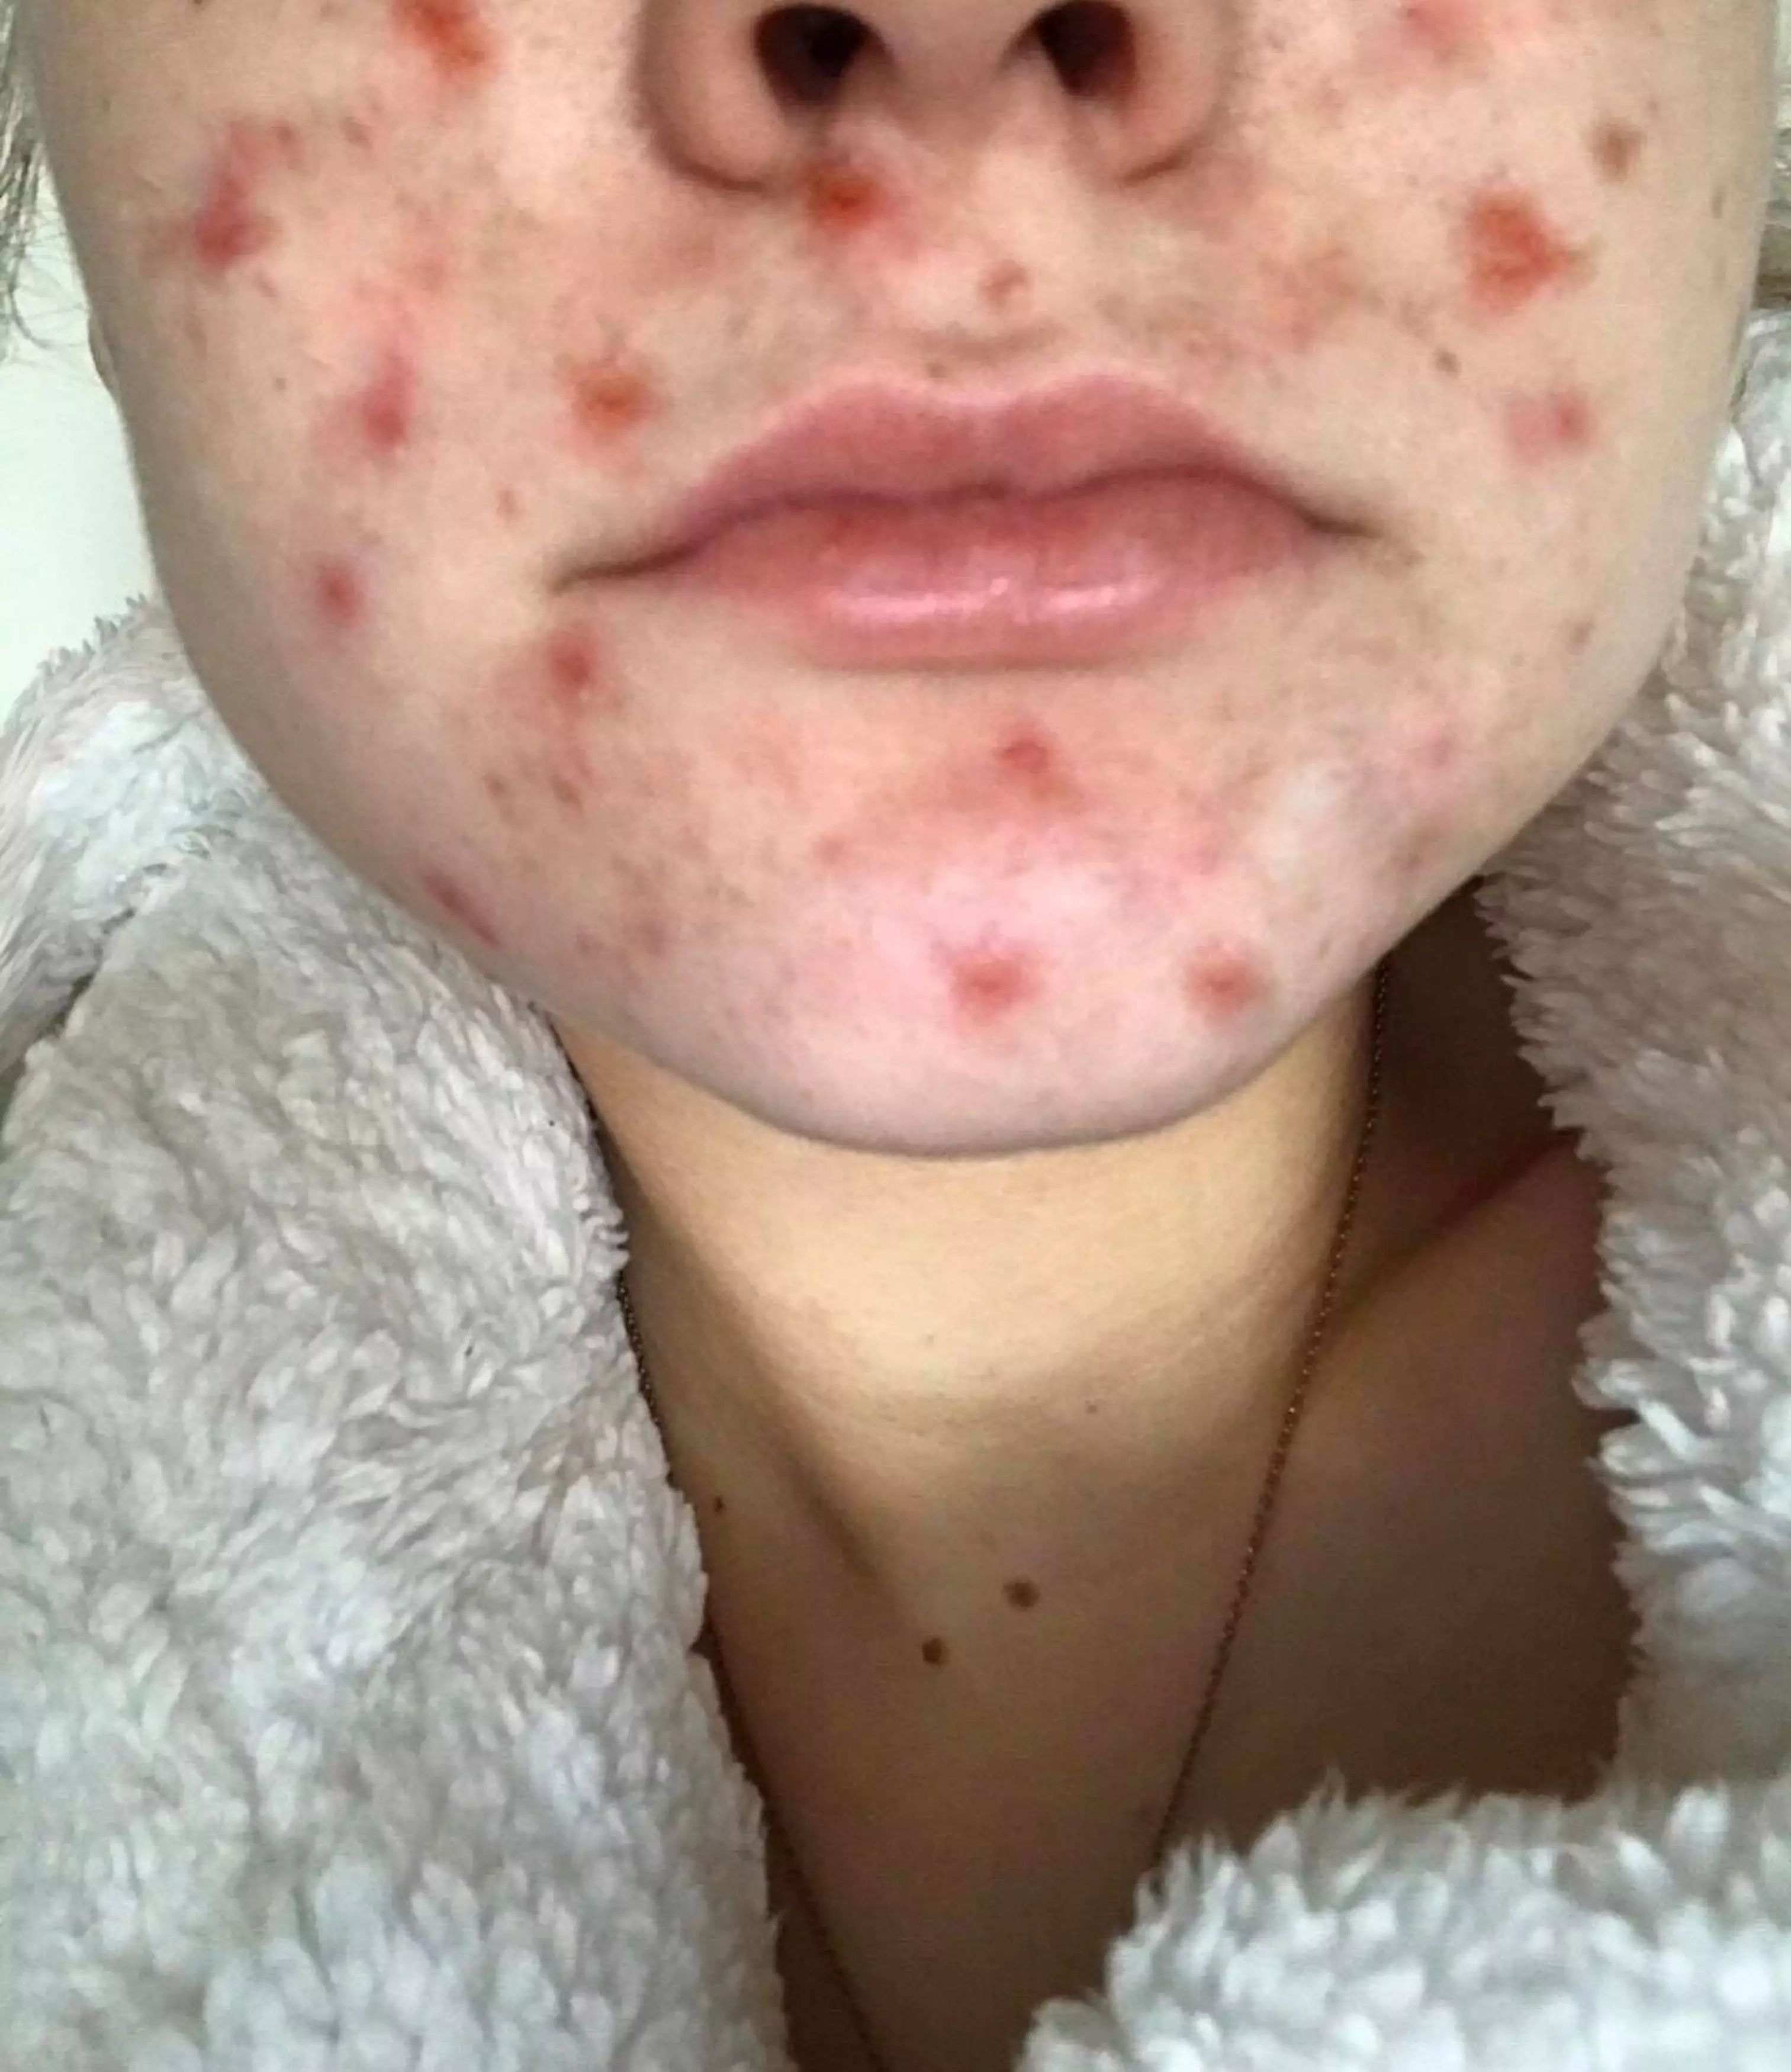 Ellie used to suffer with large, red spots all over her face (